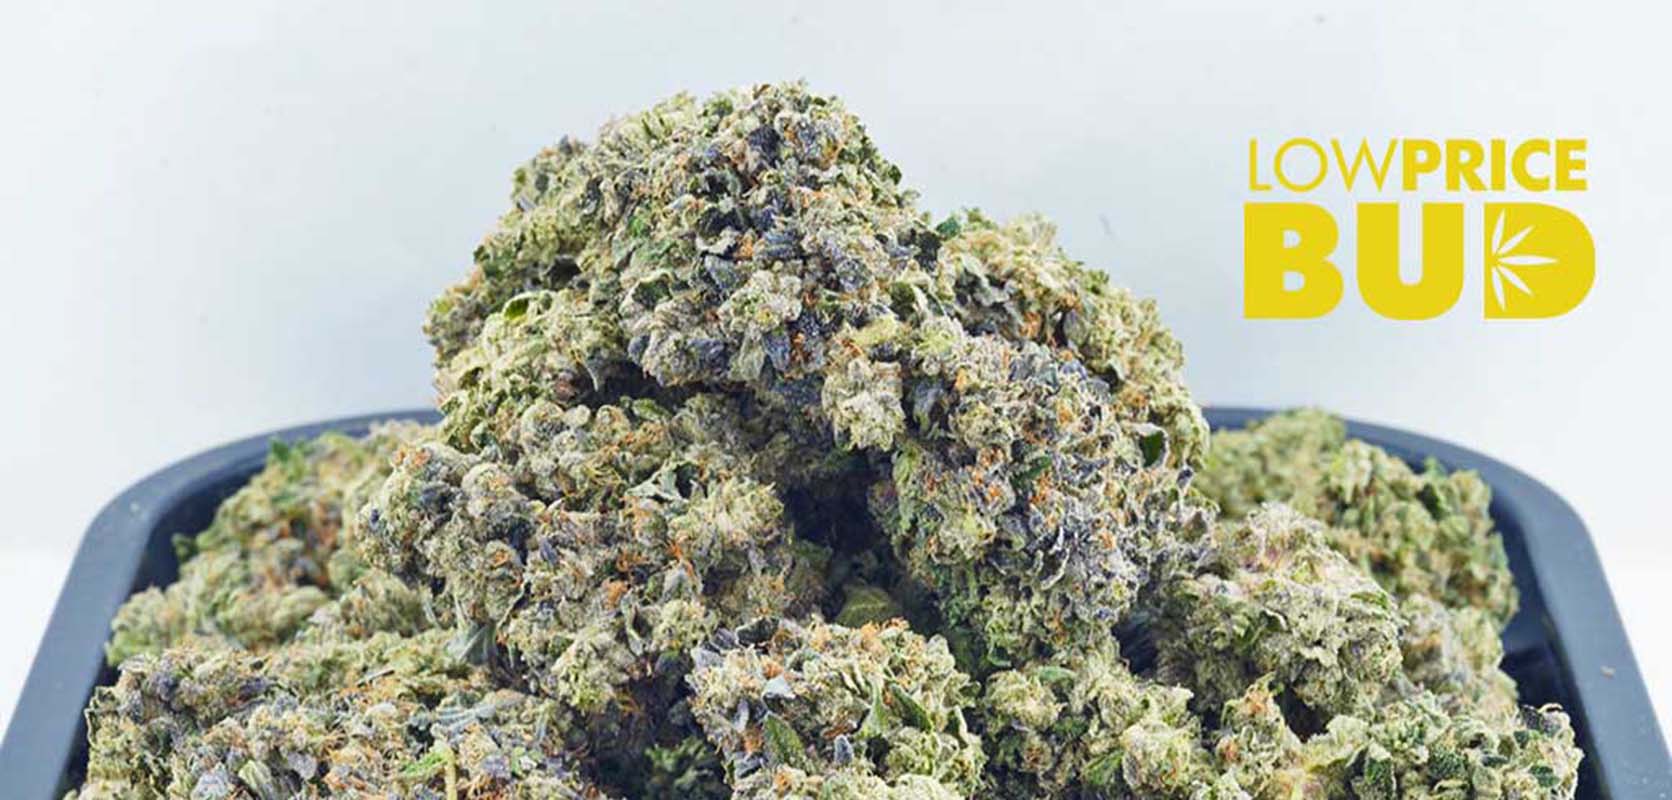 AAAA Bruce Banner strain buy weed online. Buy weed online canada with cheap ounces for sale at low price bud online dispensary.